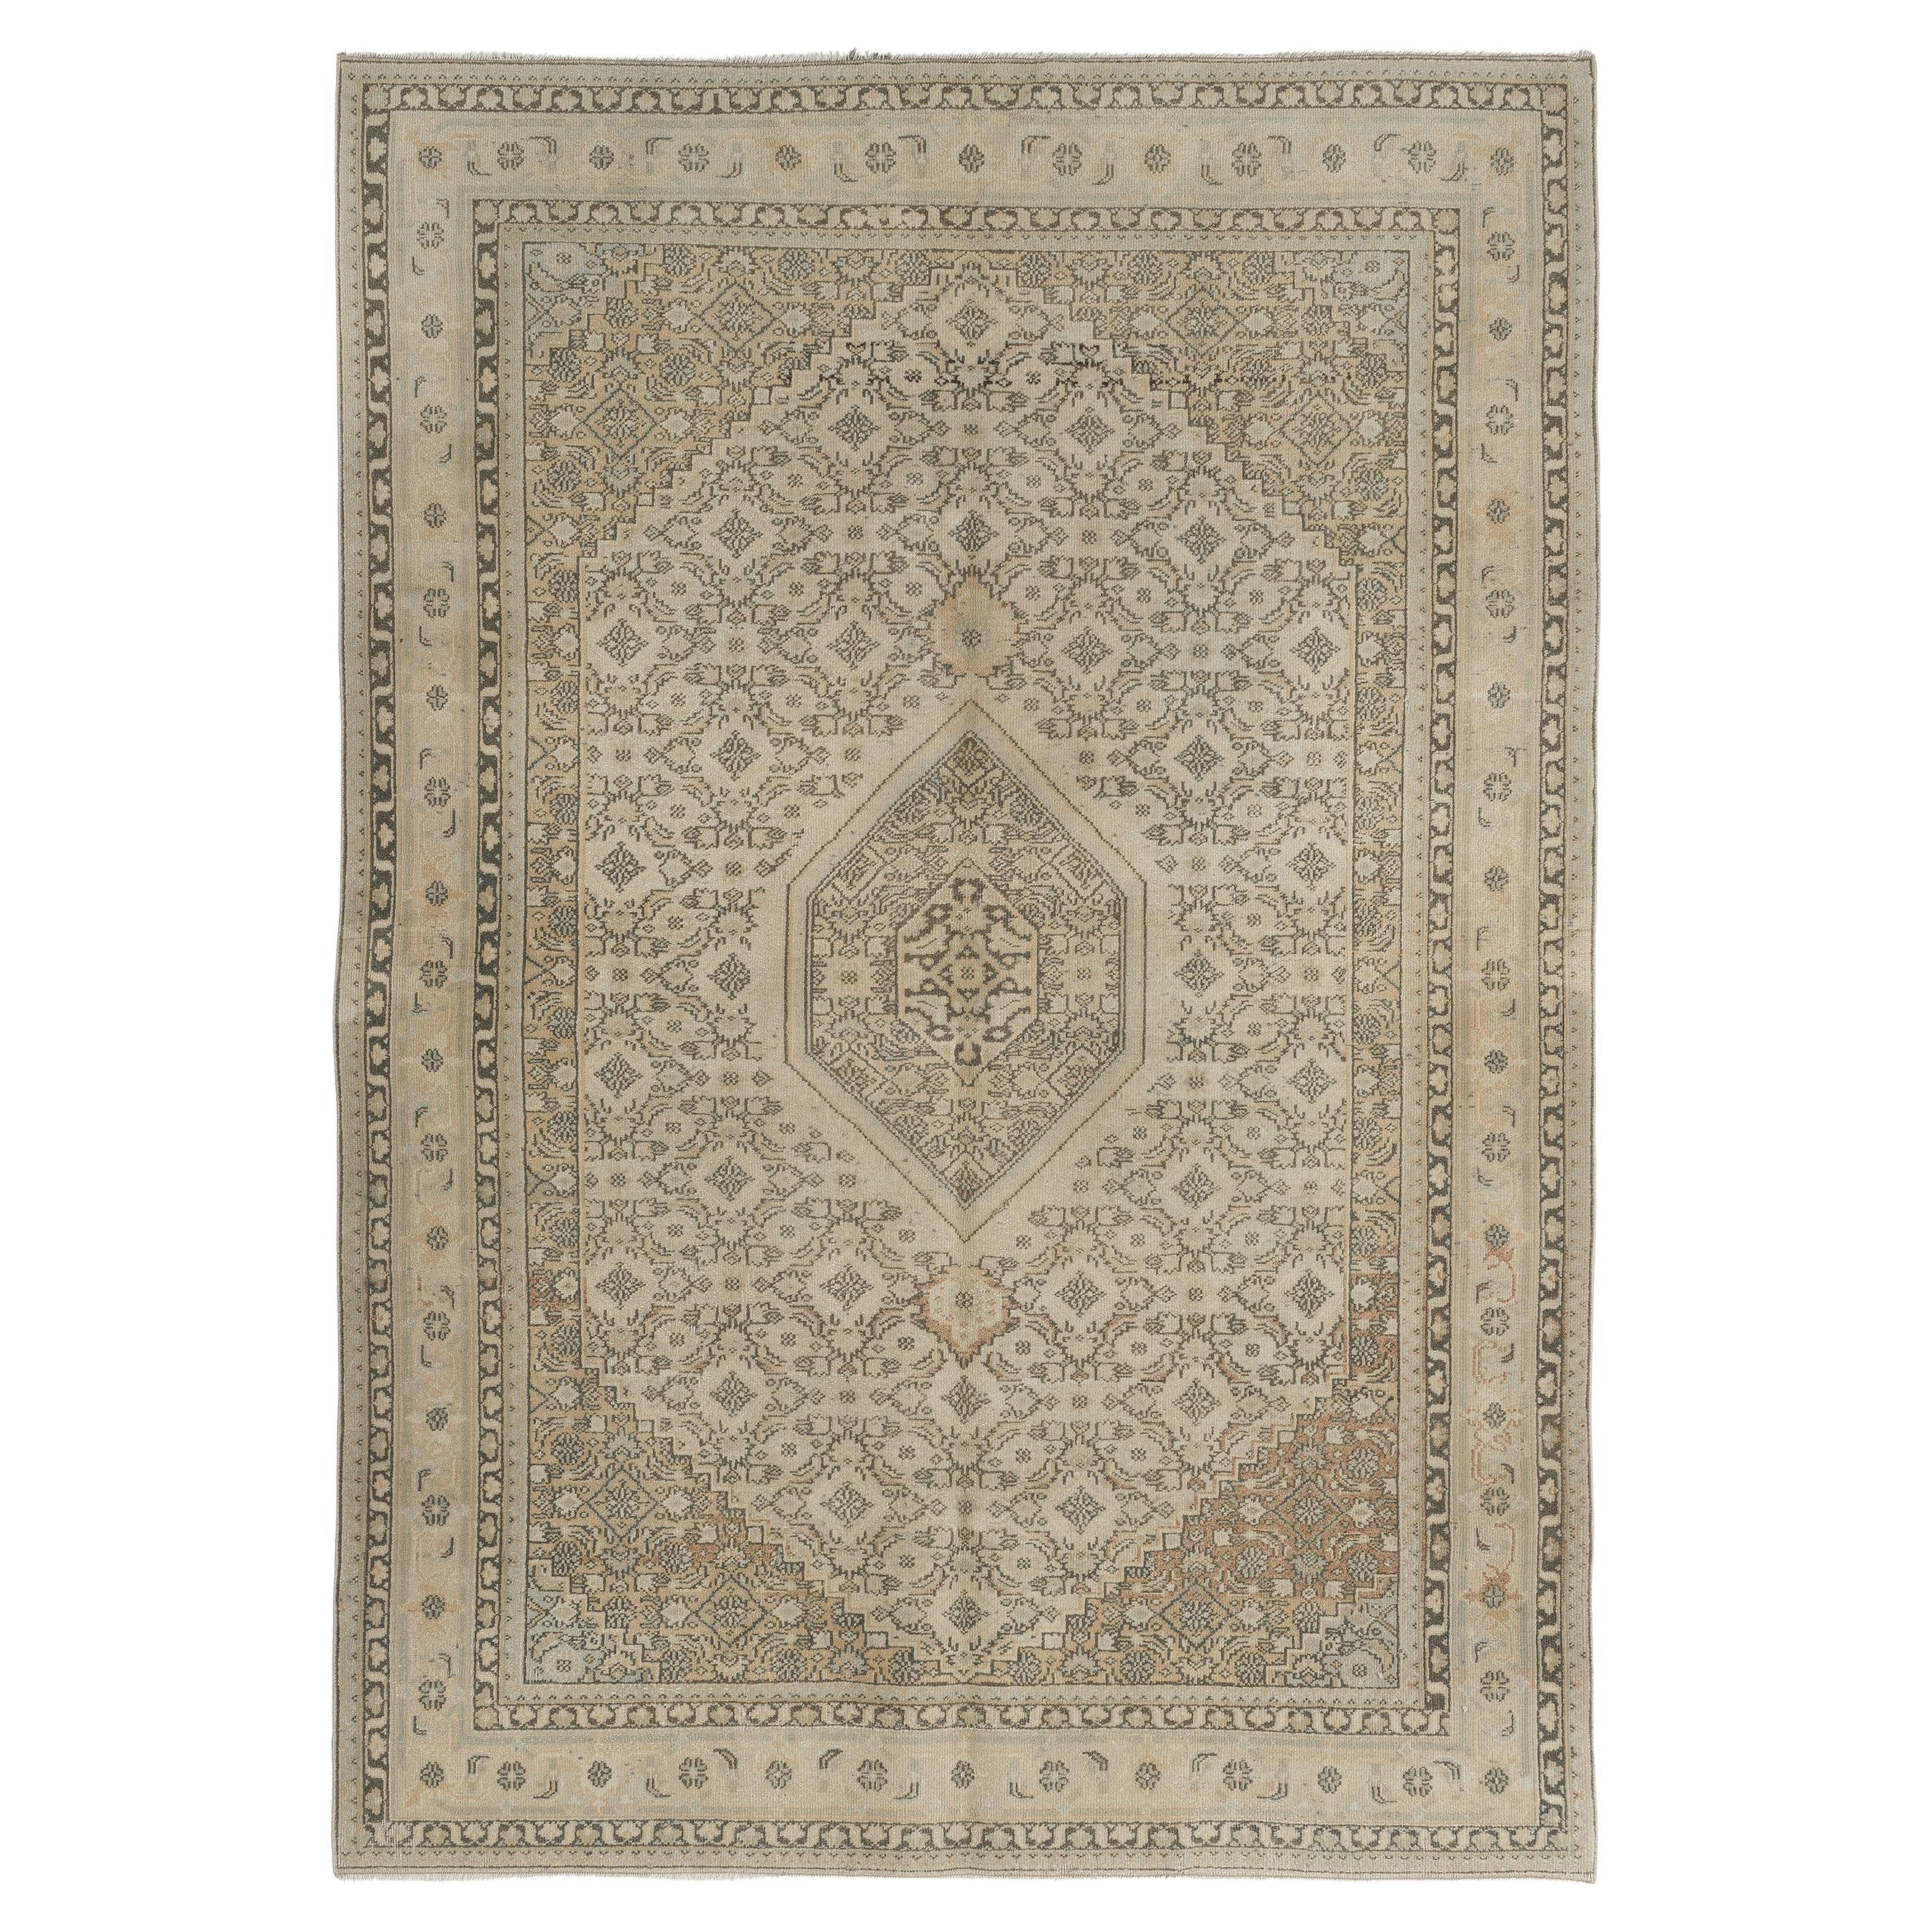 5.4x7.7 ft Hand Knotted Vintage Anatolian Oushak Wool Area Rug in Neutral Colors